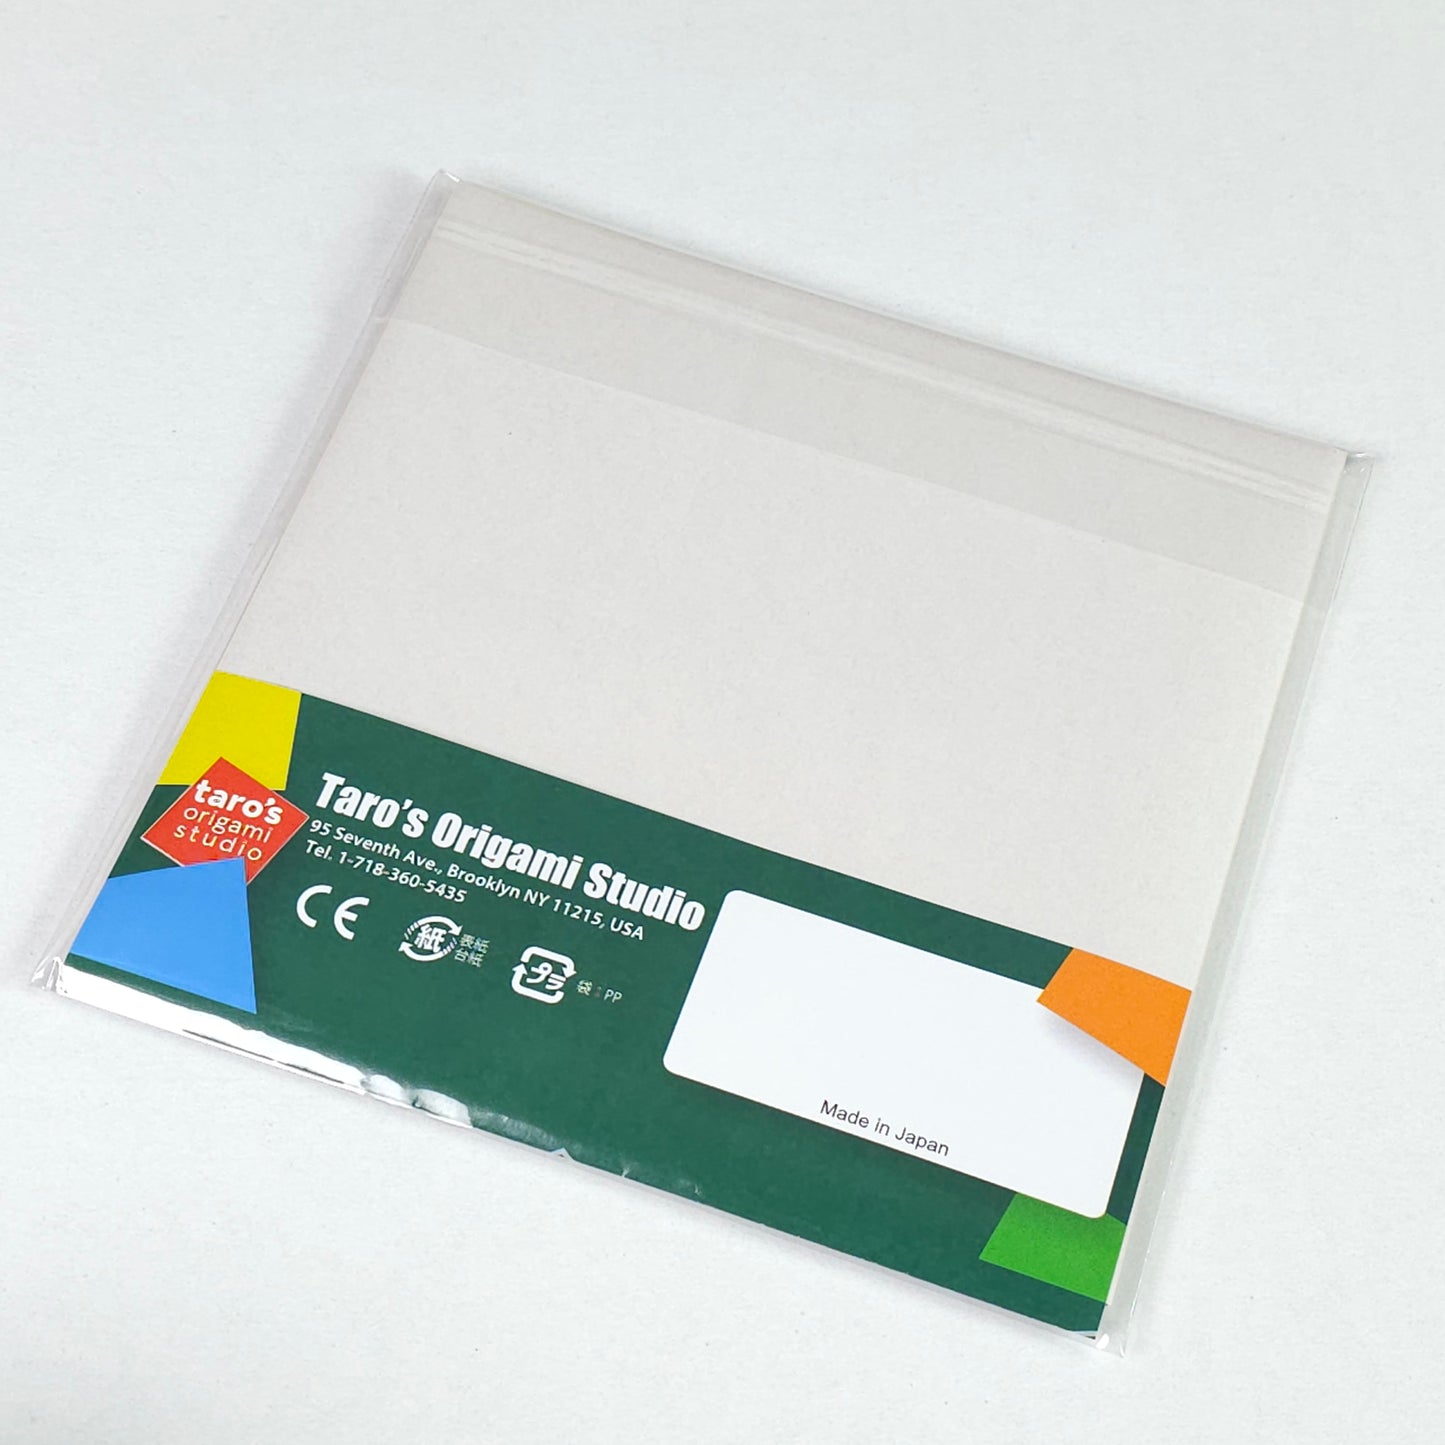 Standard 6 Inch One Sided Single Color (White) 50 Sheets (All Same Color) Square Easy Fold Premium Japanese Paper for Beginner (Made in Japan)